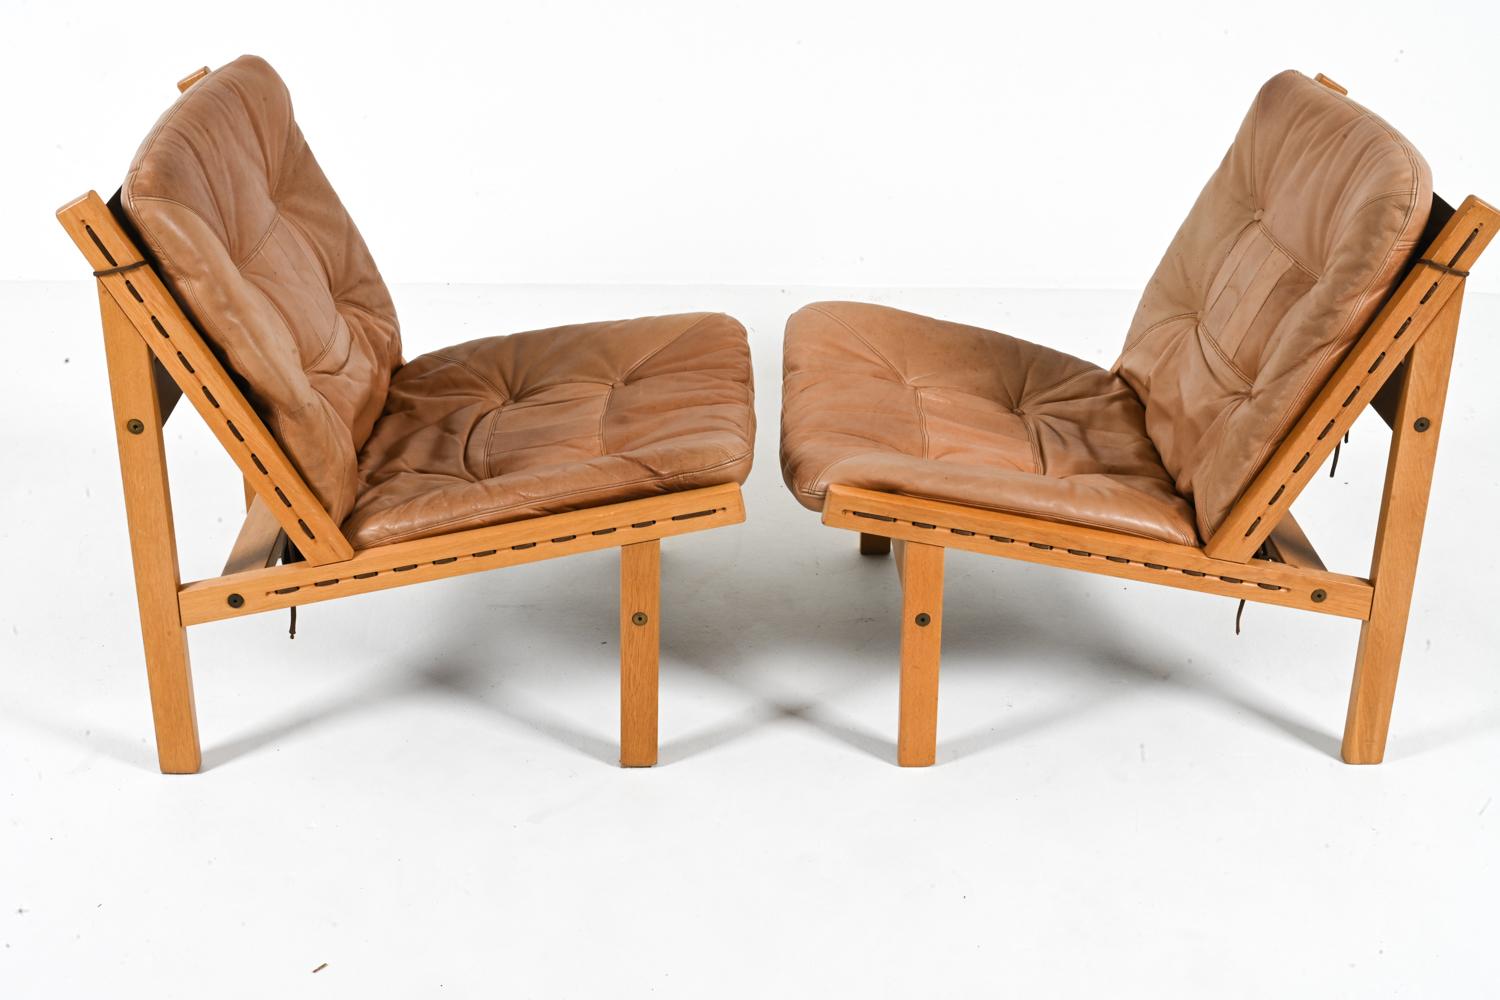 20th Century Pair of Oak 'Hunter' Lounge Chairs by Torbjørn Afdal for Bruksbo, Norway, 1960's For Sale